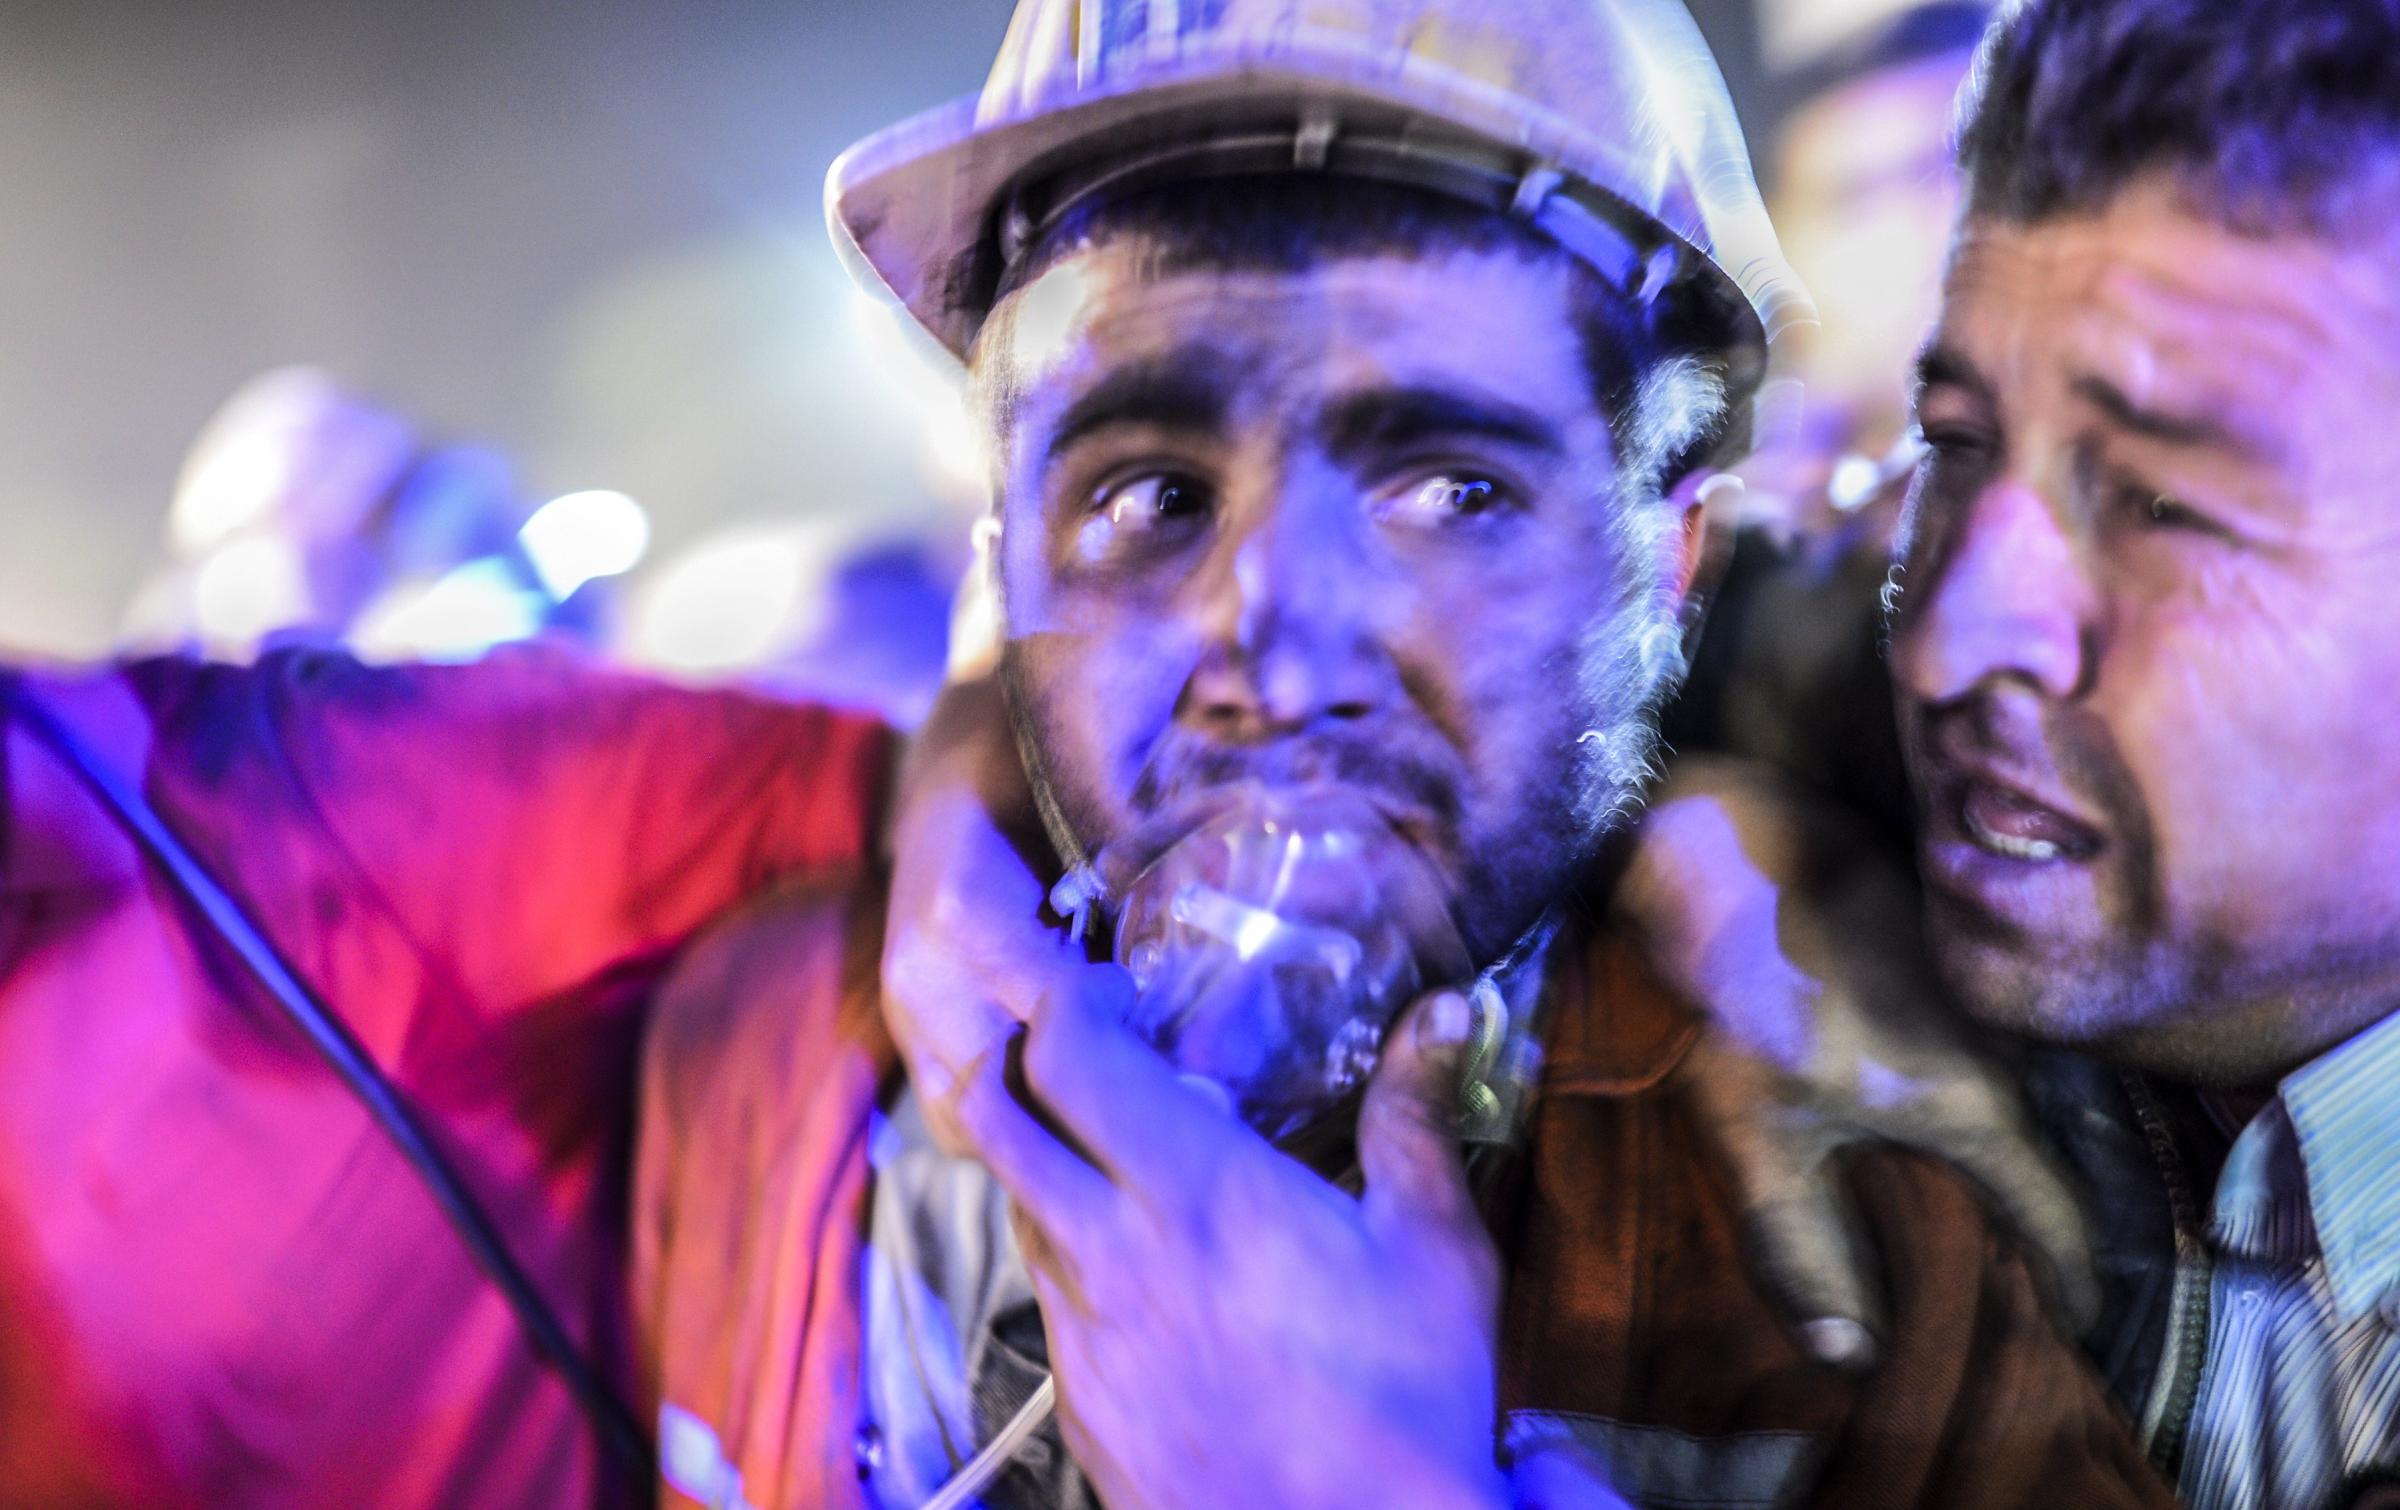 A miner with his father after an explosion on May 13, 2014 in Manisa.